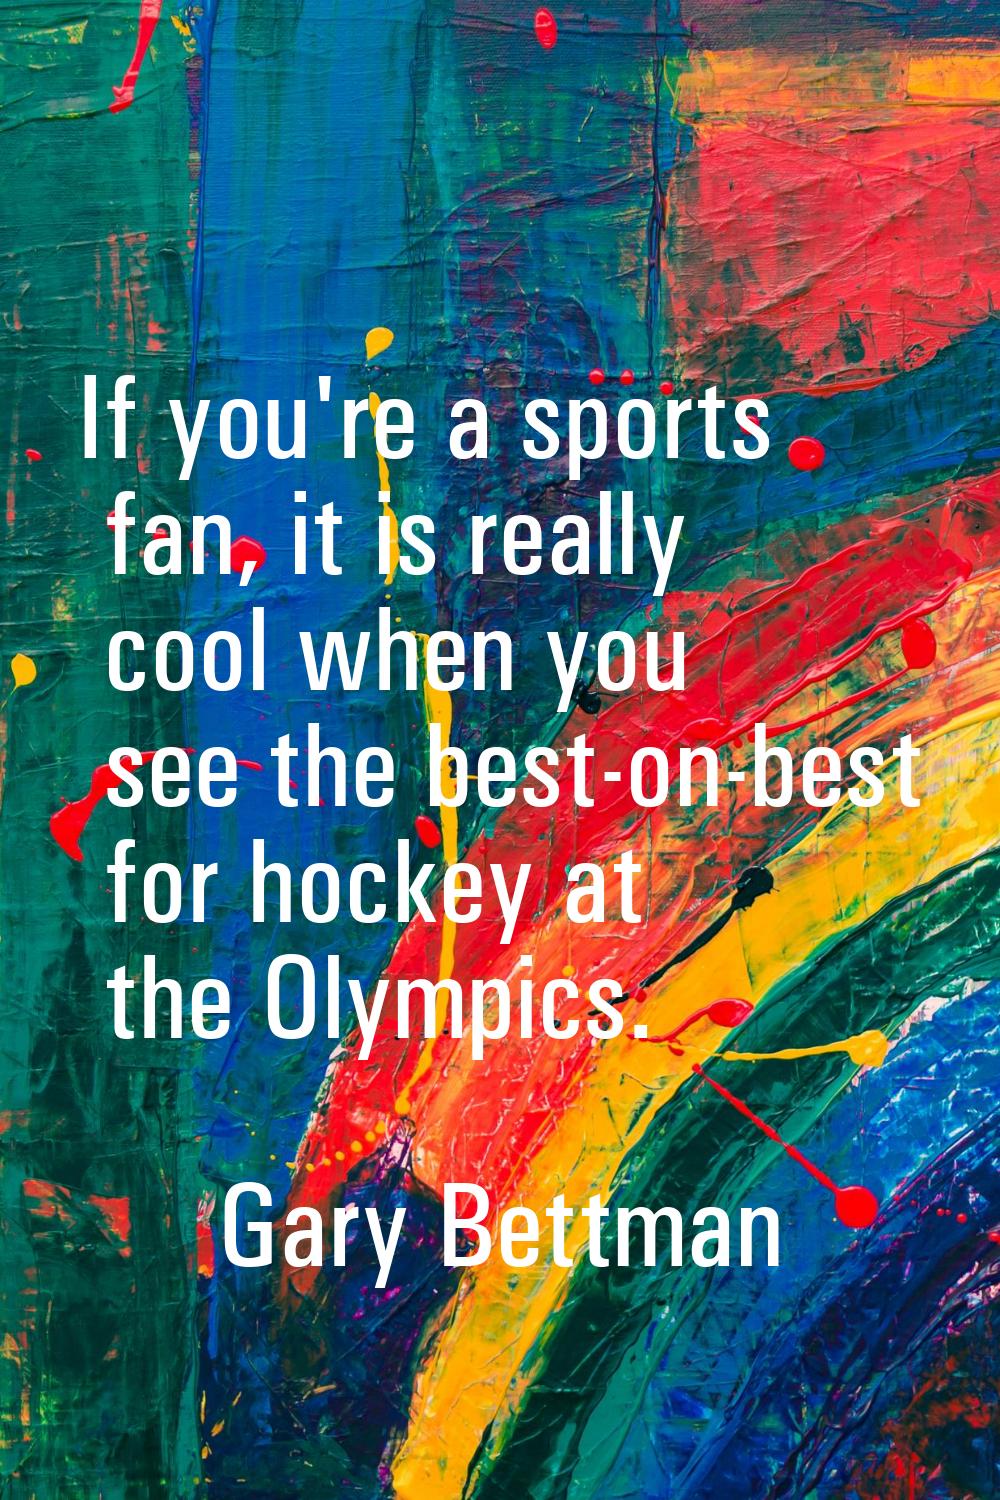 If you're a sports fan, it is really cool when you see the best-on-best for hockey at the Olympics.